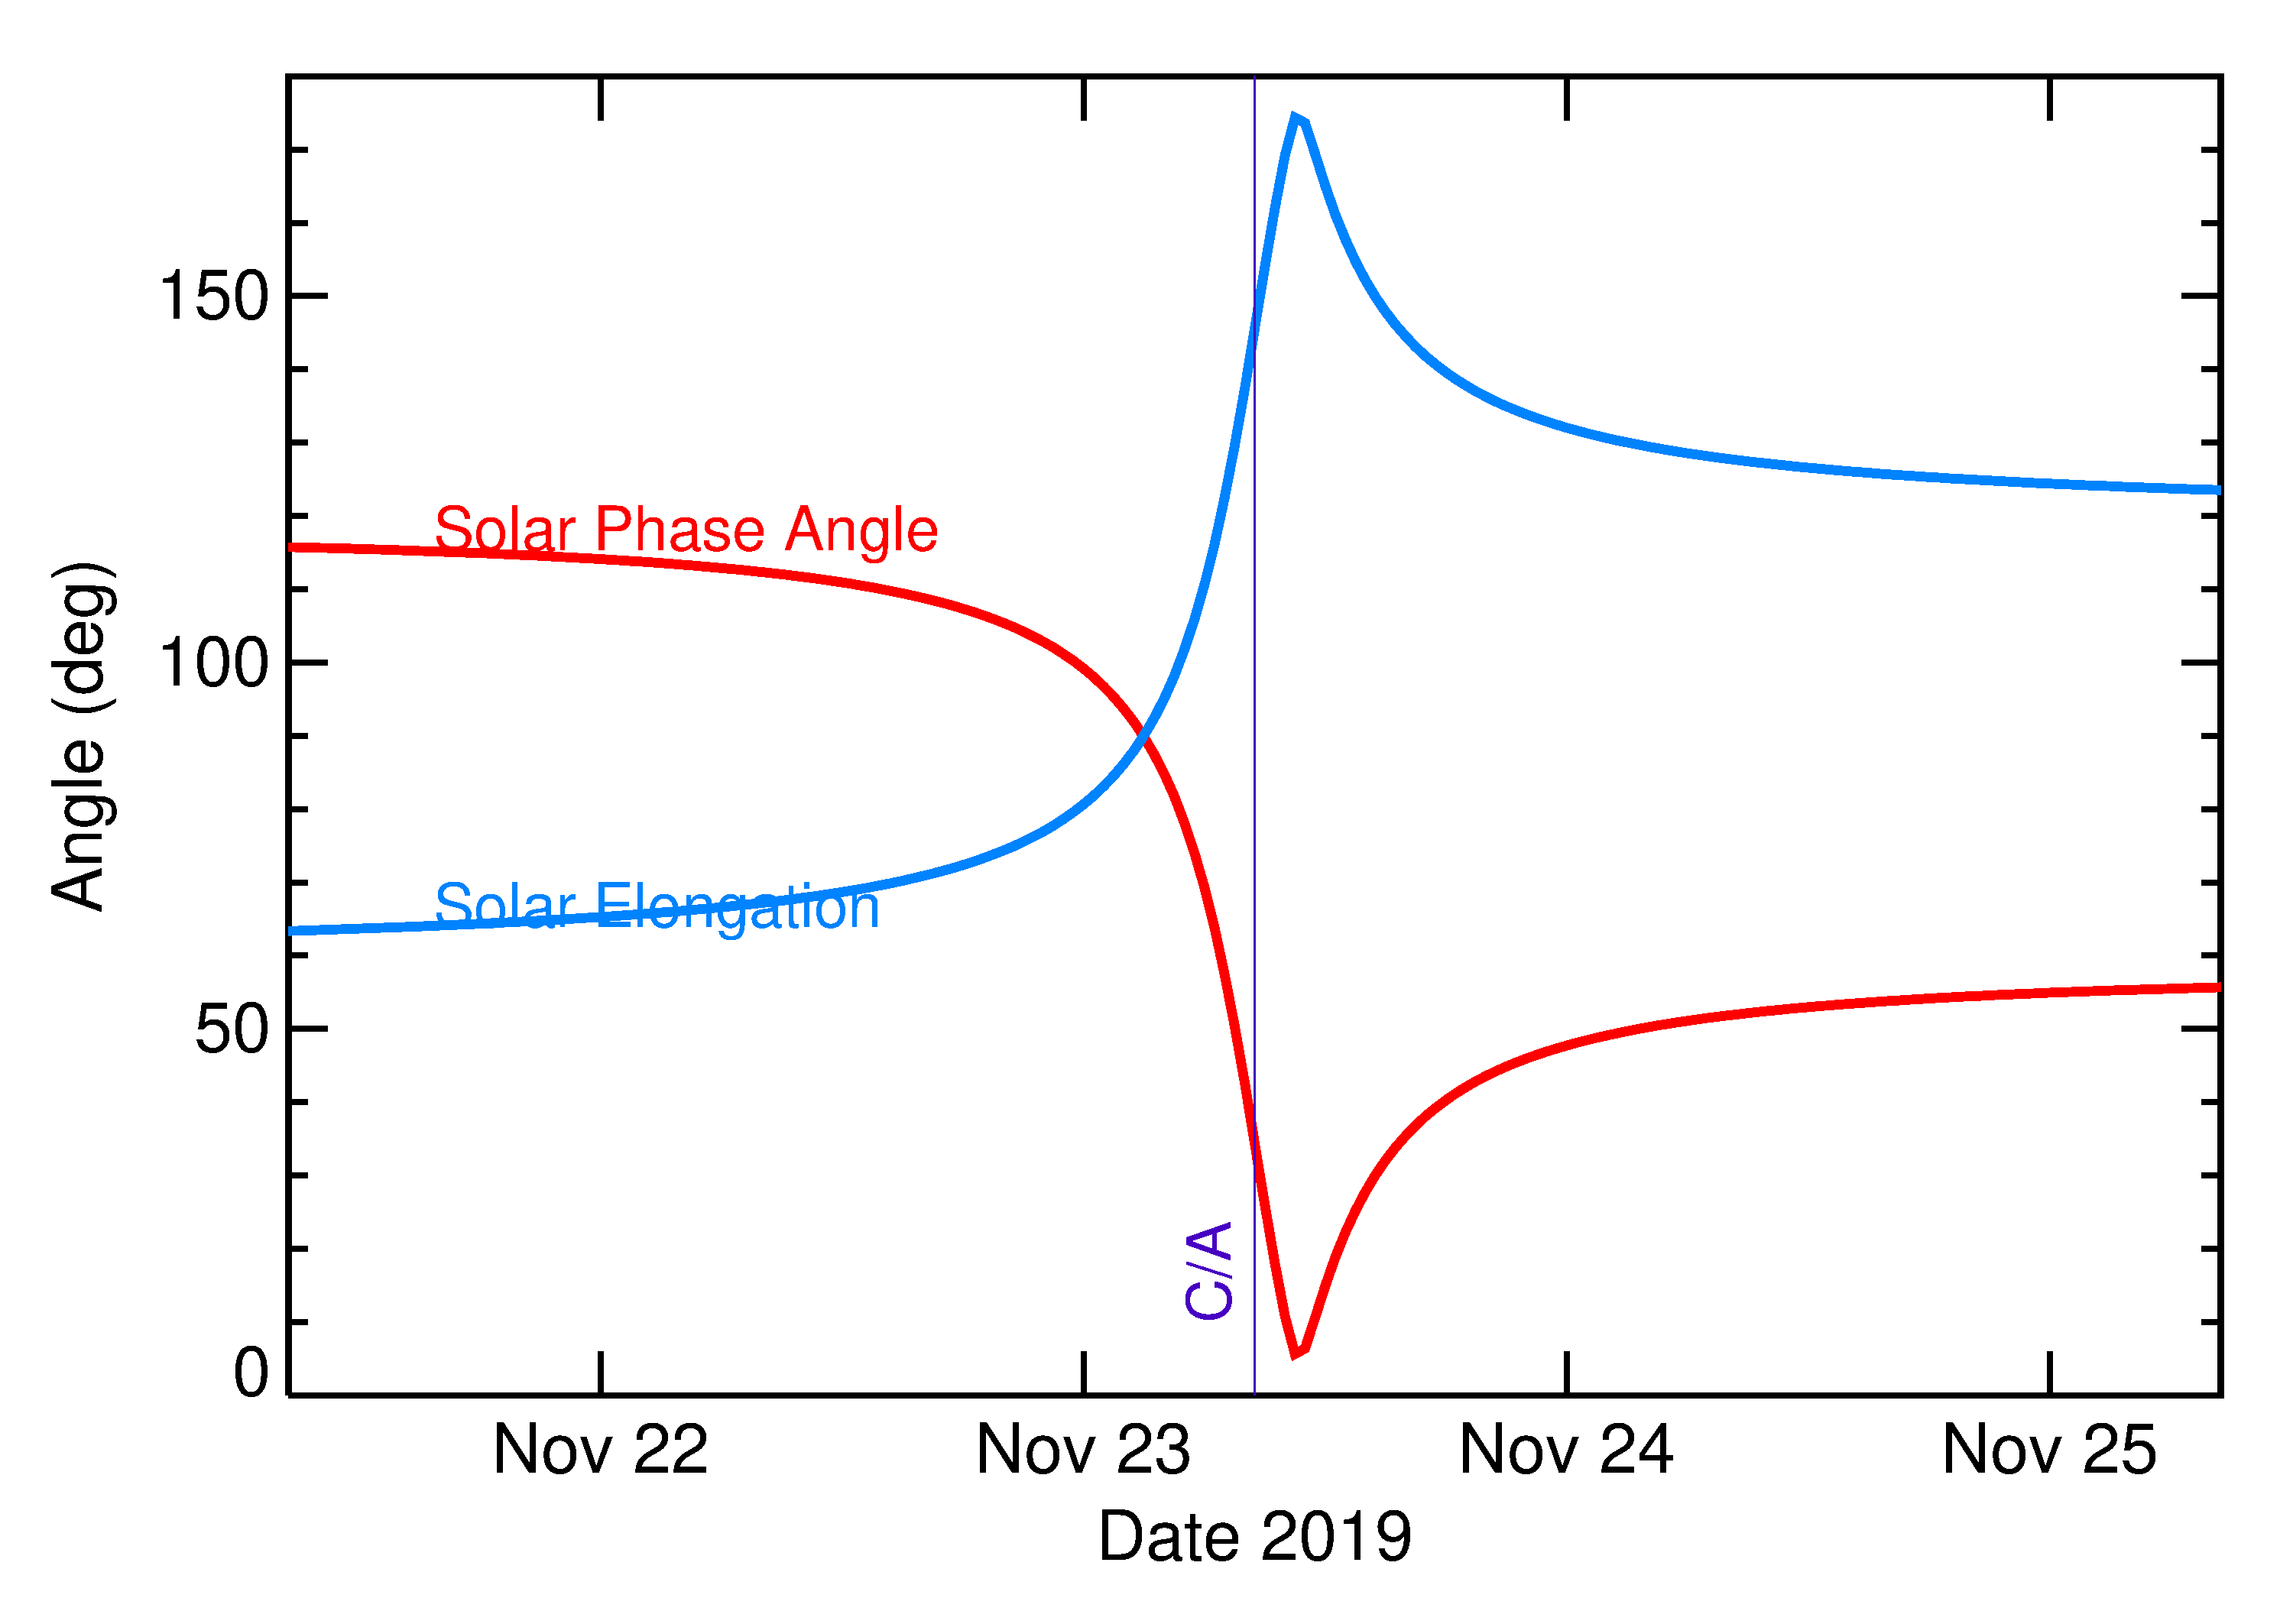 Solar Elongation and Solar Phase Angle of 2019 WG2 in the days around closest approach